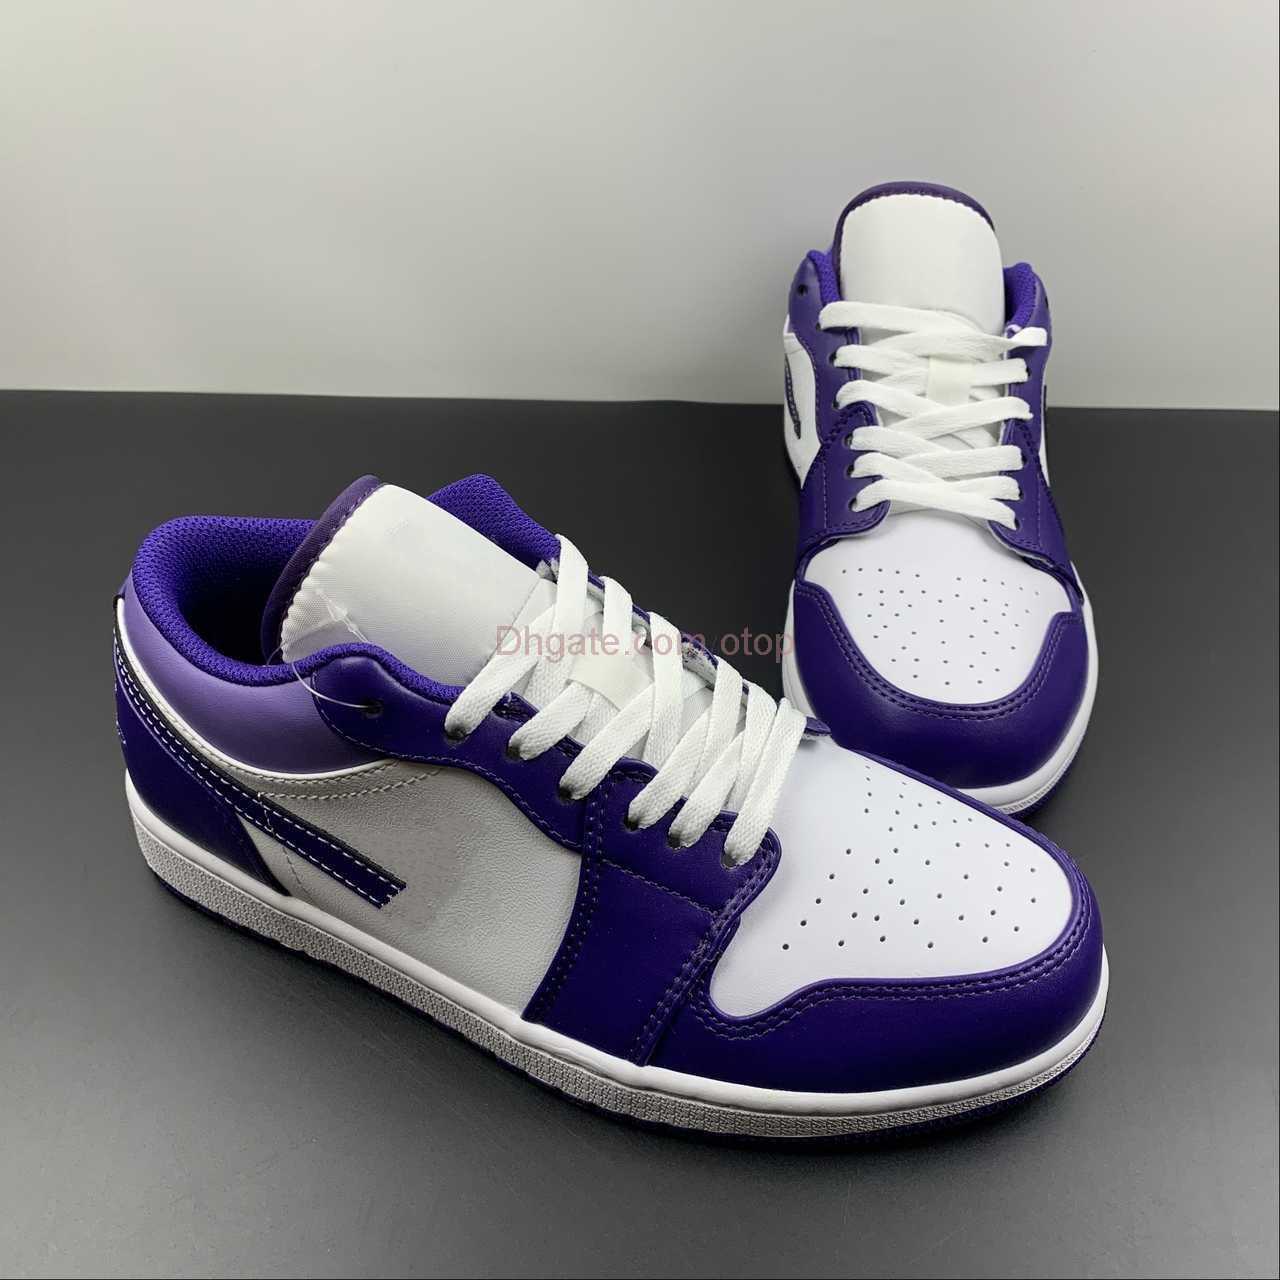 

Runnning shoes 1 Low Court Purple White Womens Mens Sports shoes Court Purple Black White Footwear Sneakers Shoes 553558-500 for size EUR 36-46, 553558-515